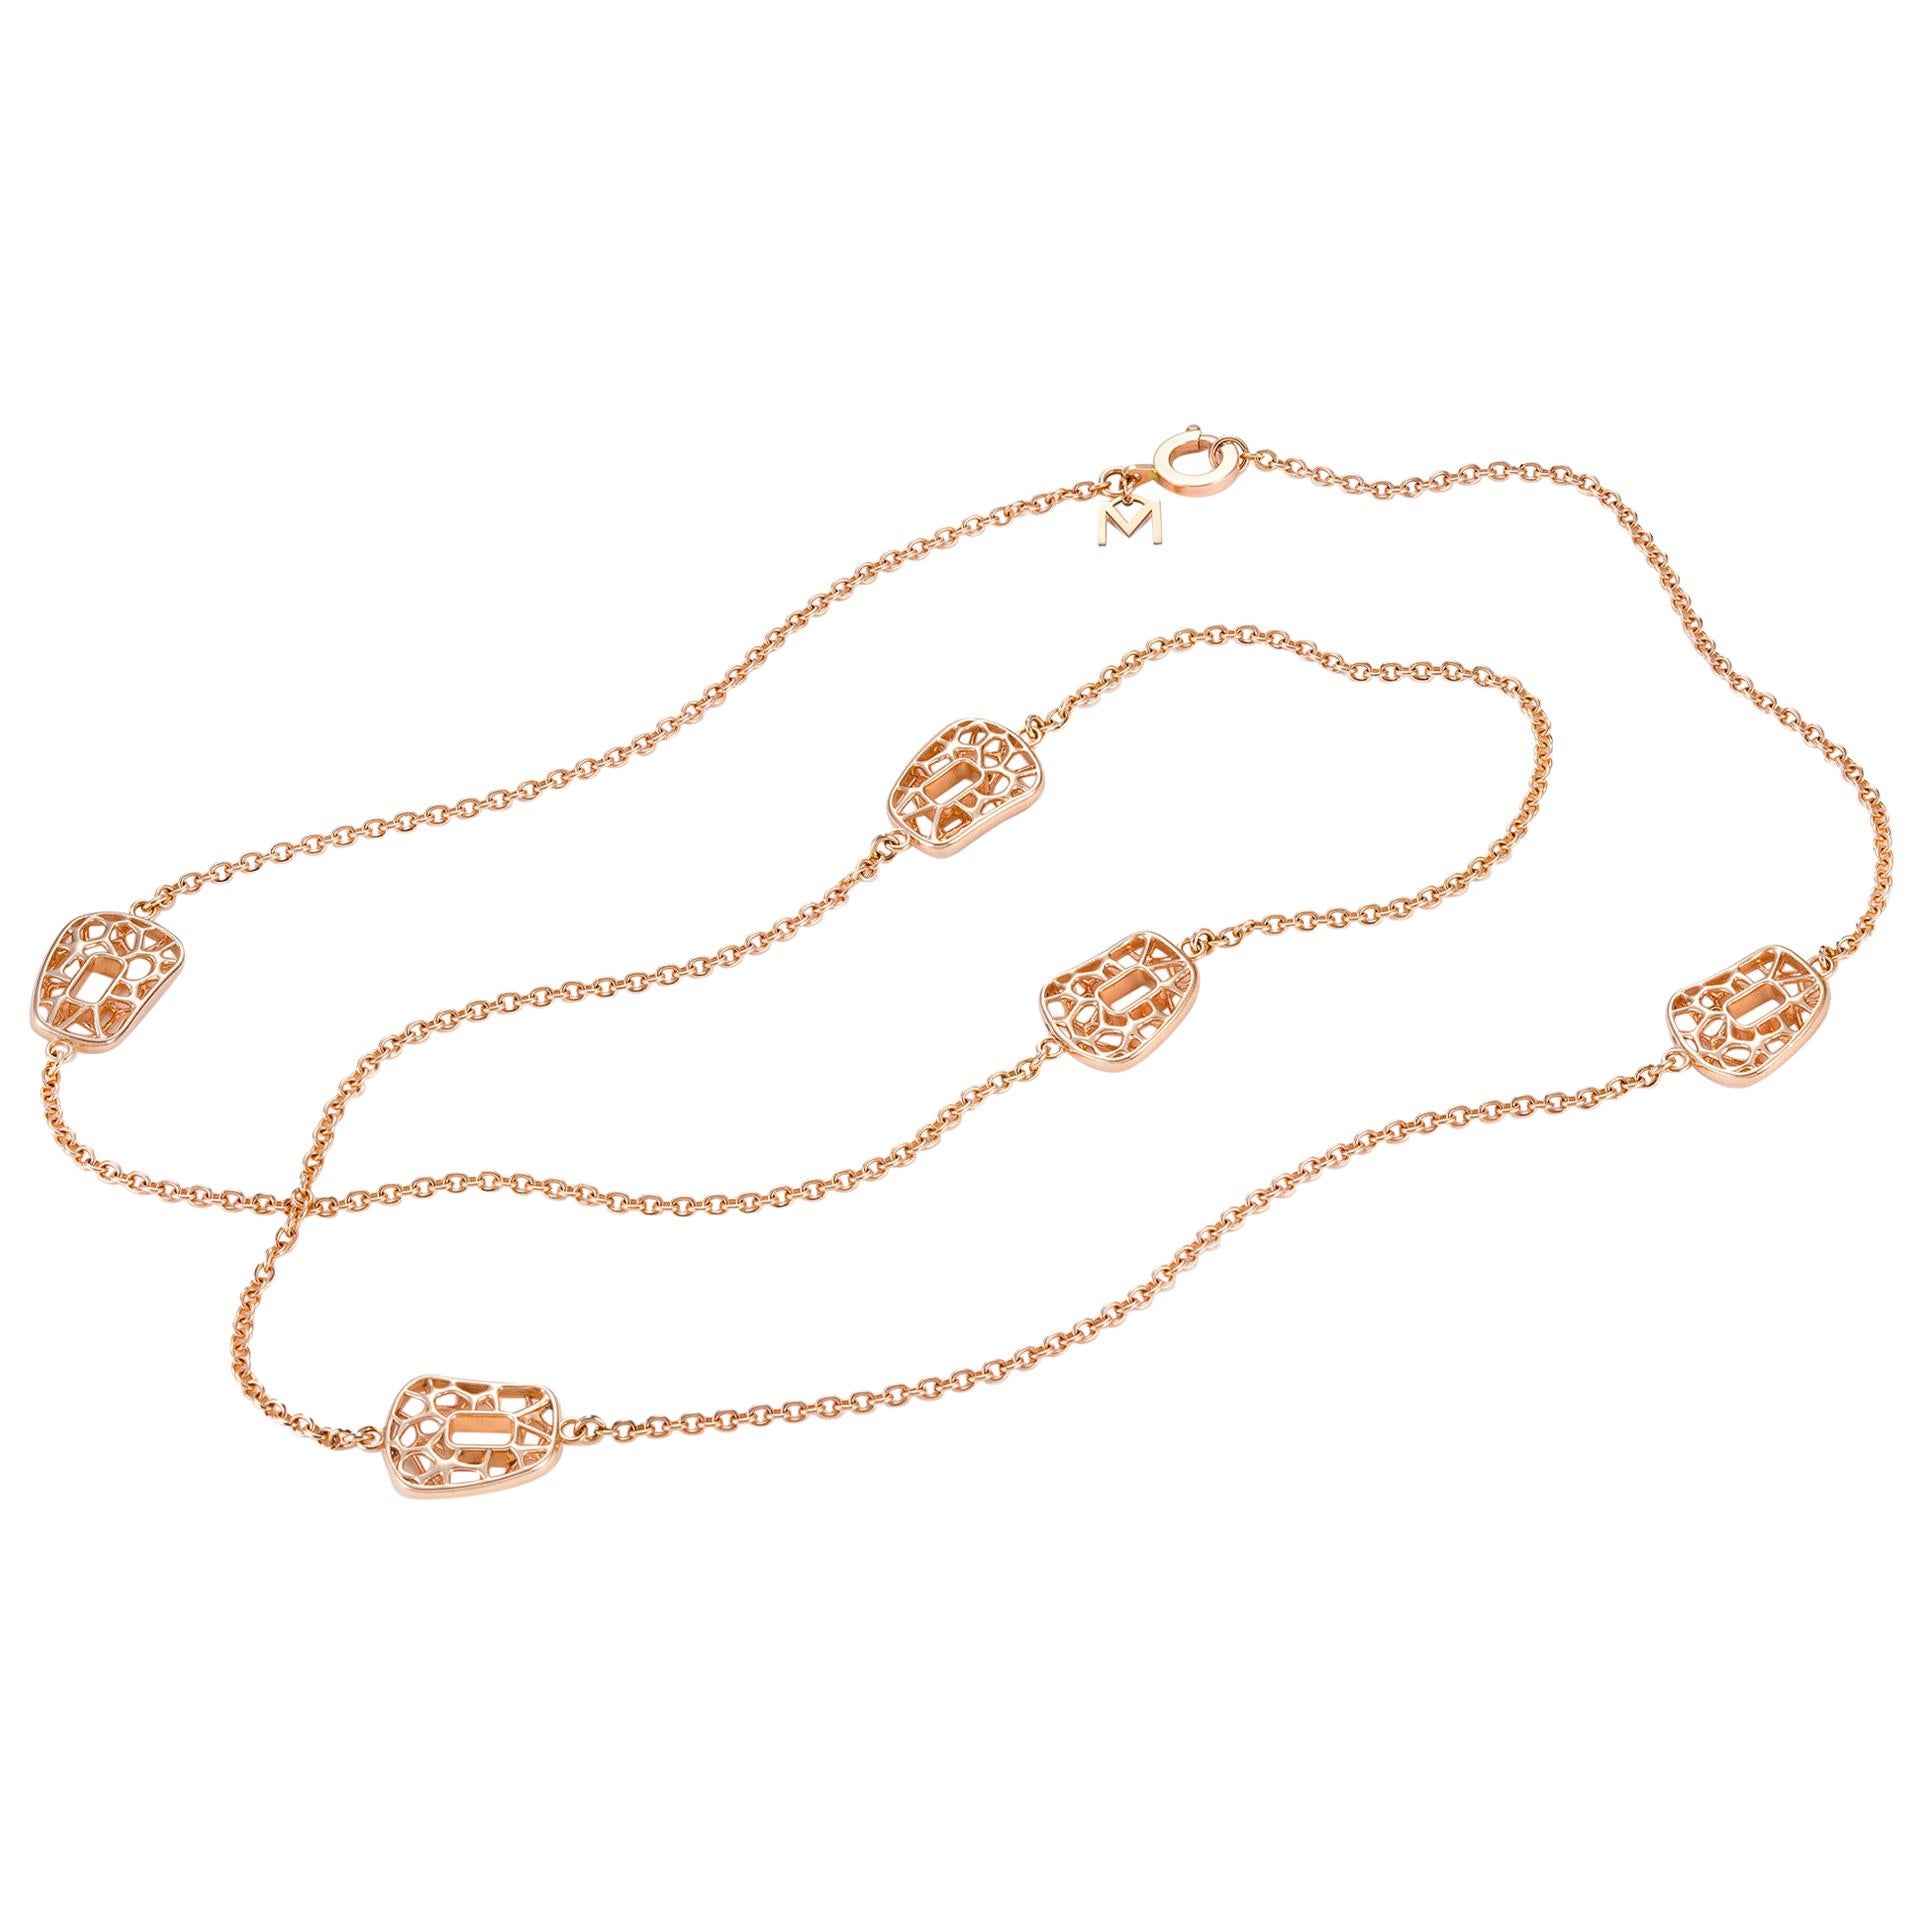 Mattioli Puzzle Collection 18 Karat Rose Gold, Openwork Chanel Necklace For Sale